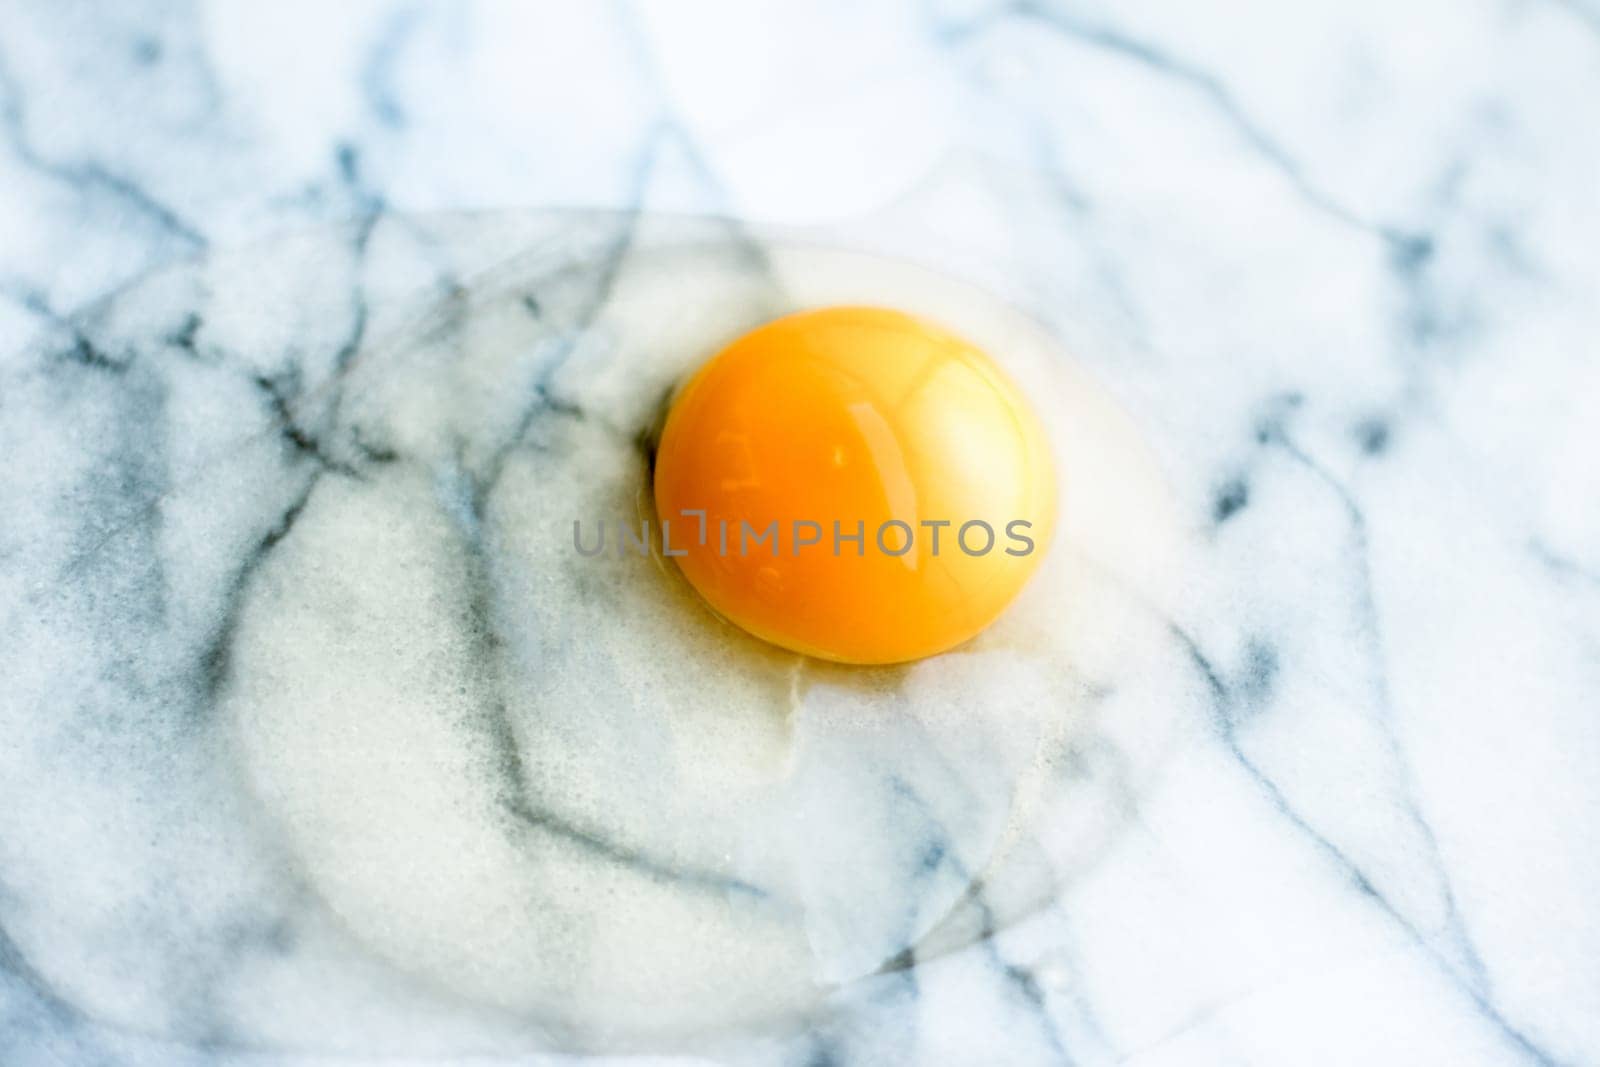 egg yolk on marble - recipe ingredients and homemade cooking styled concept